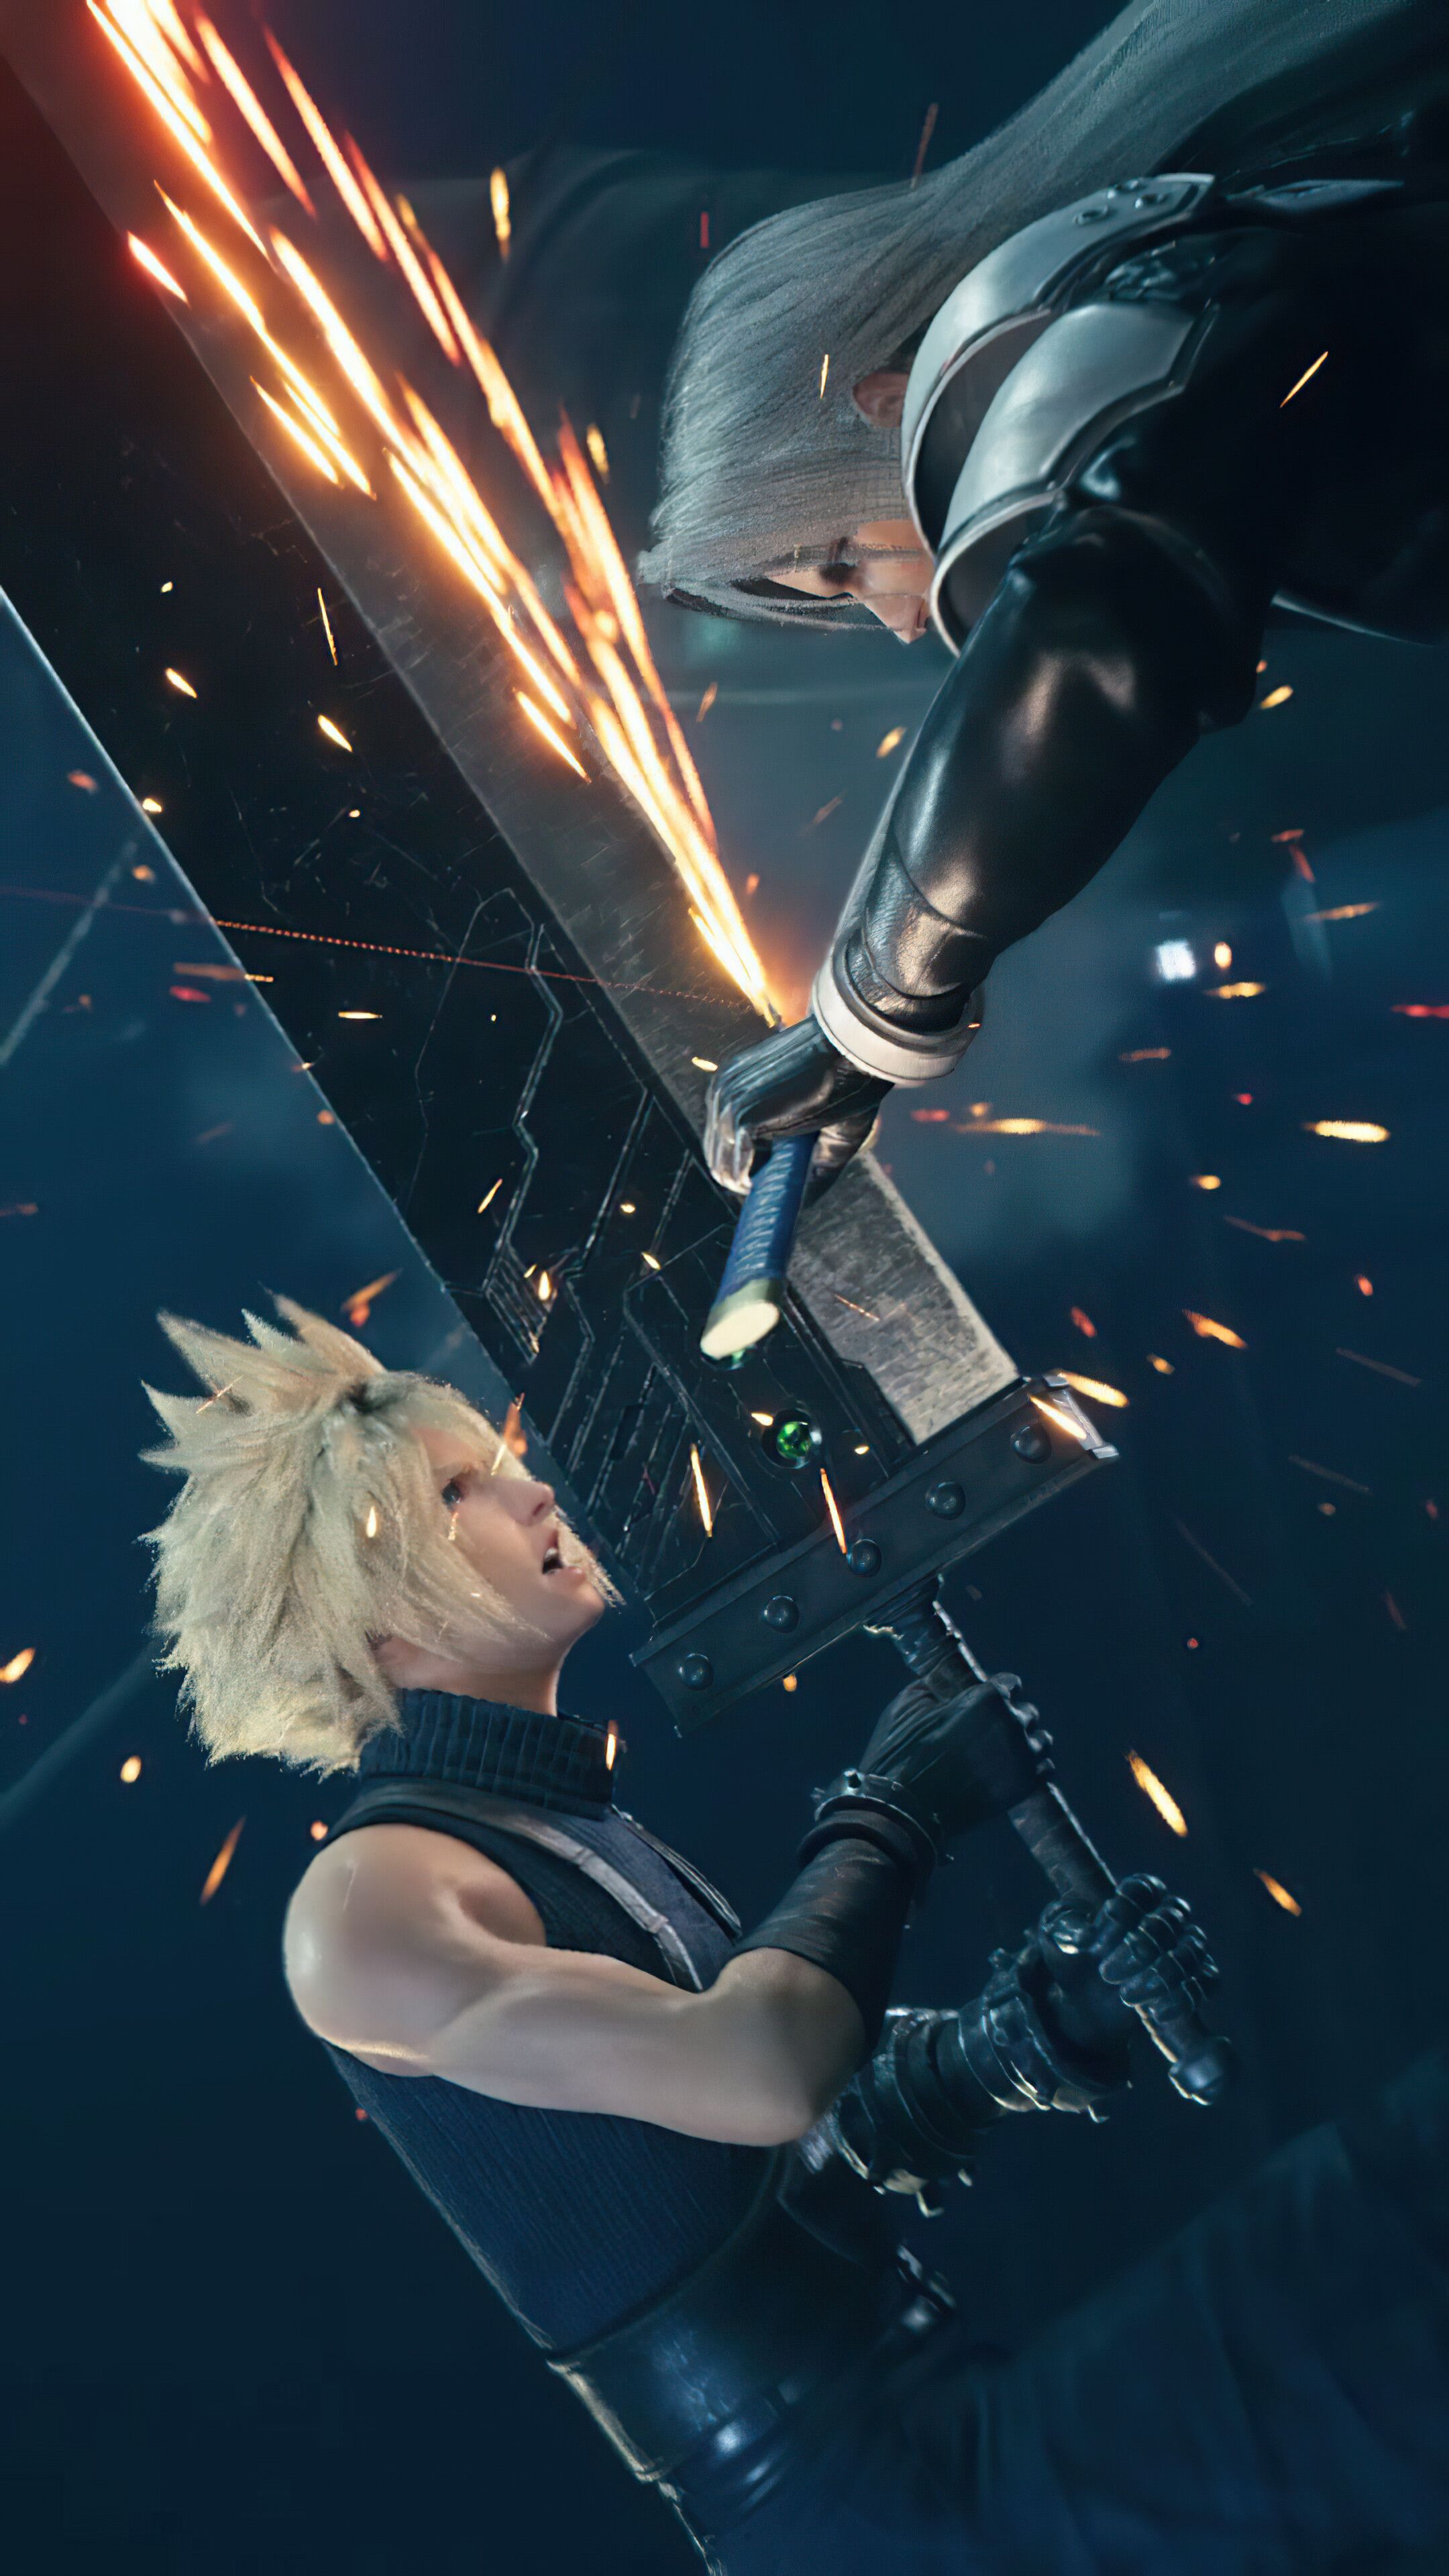 Final Fantasy VII Remake iPhone Wallpapers - Wallpaper Cave